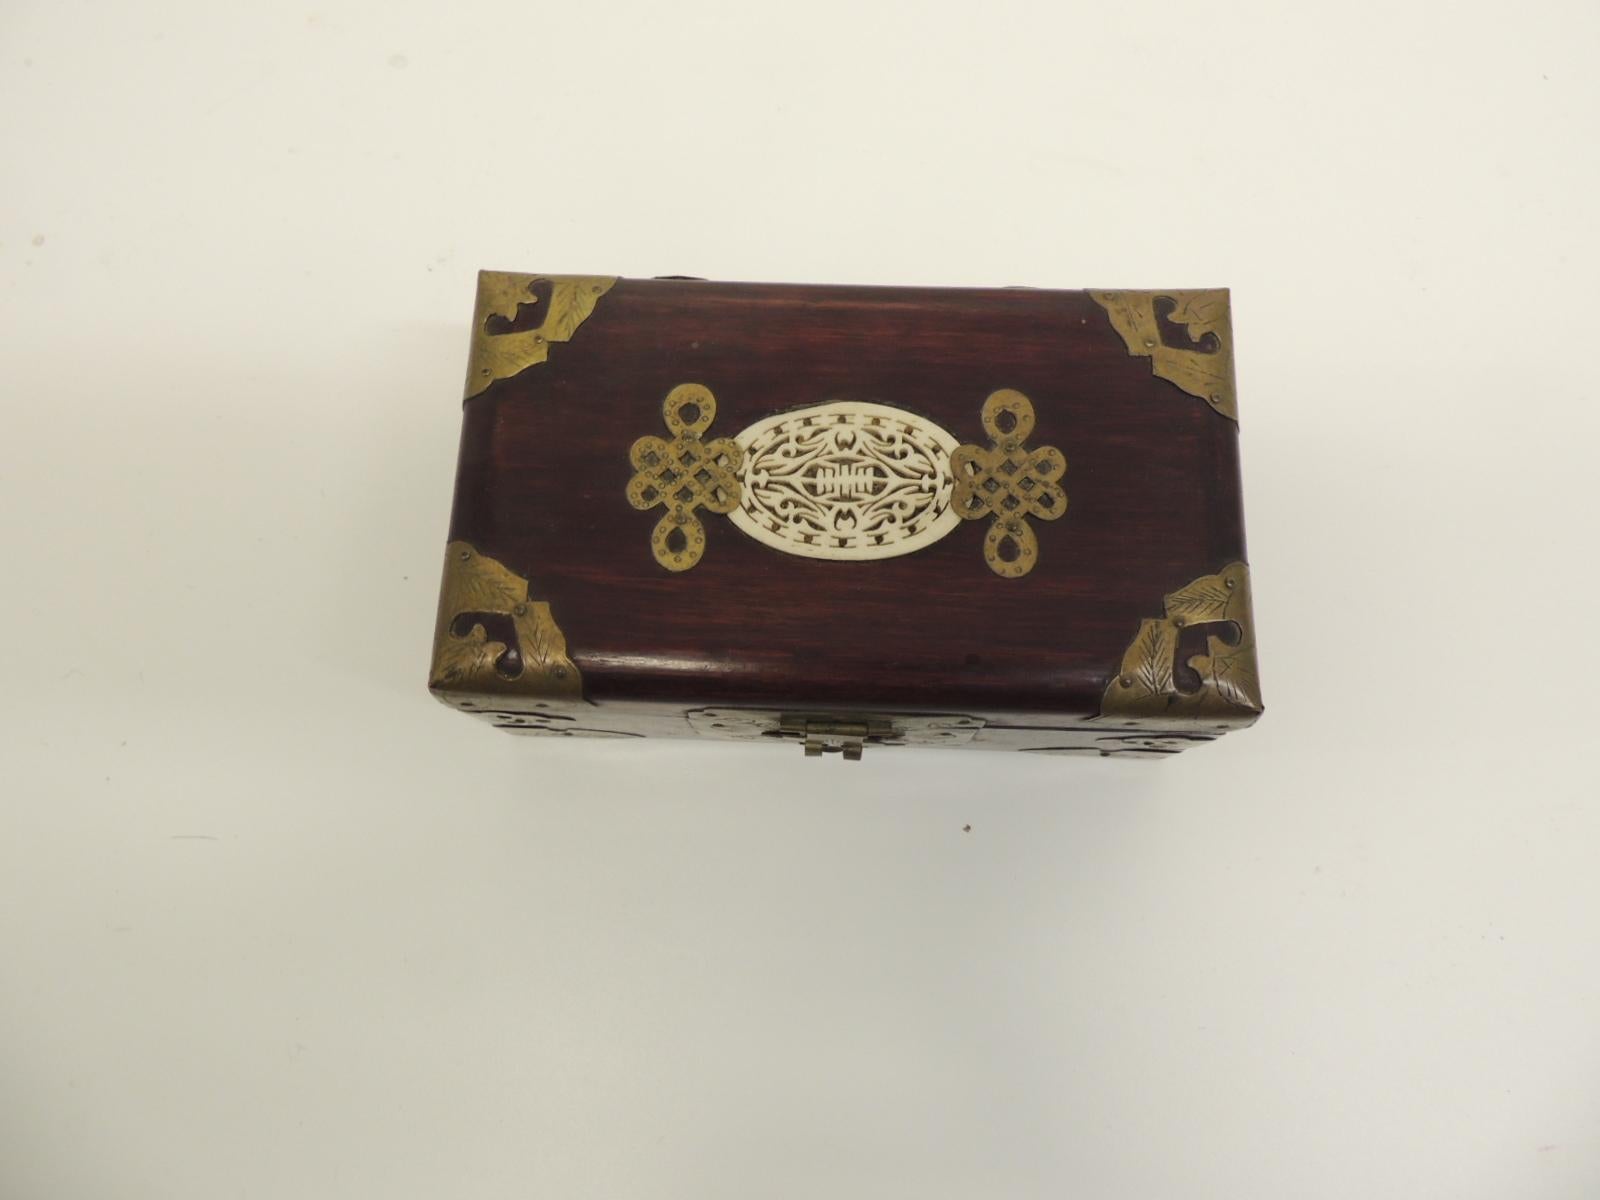 Vintage hand carved wood and bone Asian jewelry box.
Inside compartments are lined with woven silk textile depicting a village scene.
The wood case has a carved bone medallion and brass fittings all around.
In shades of gold, green, blue and